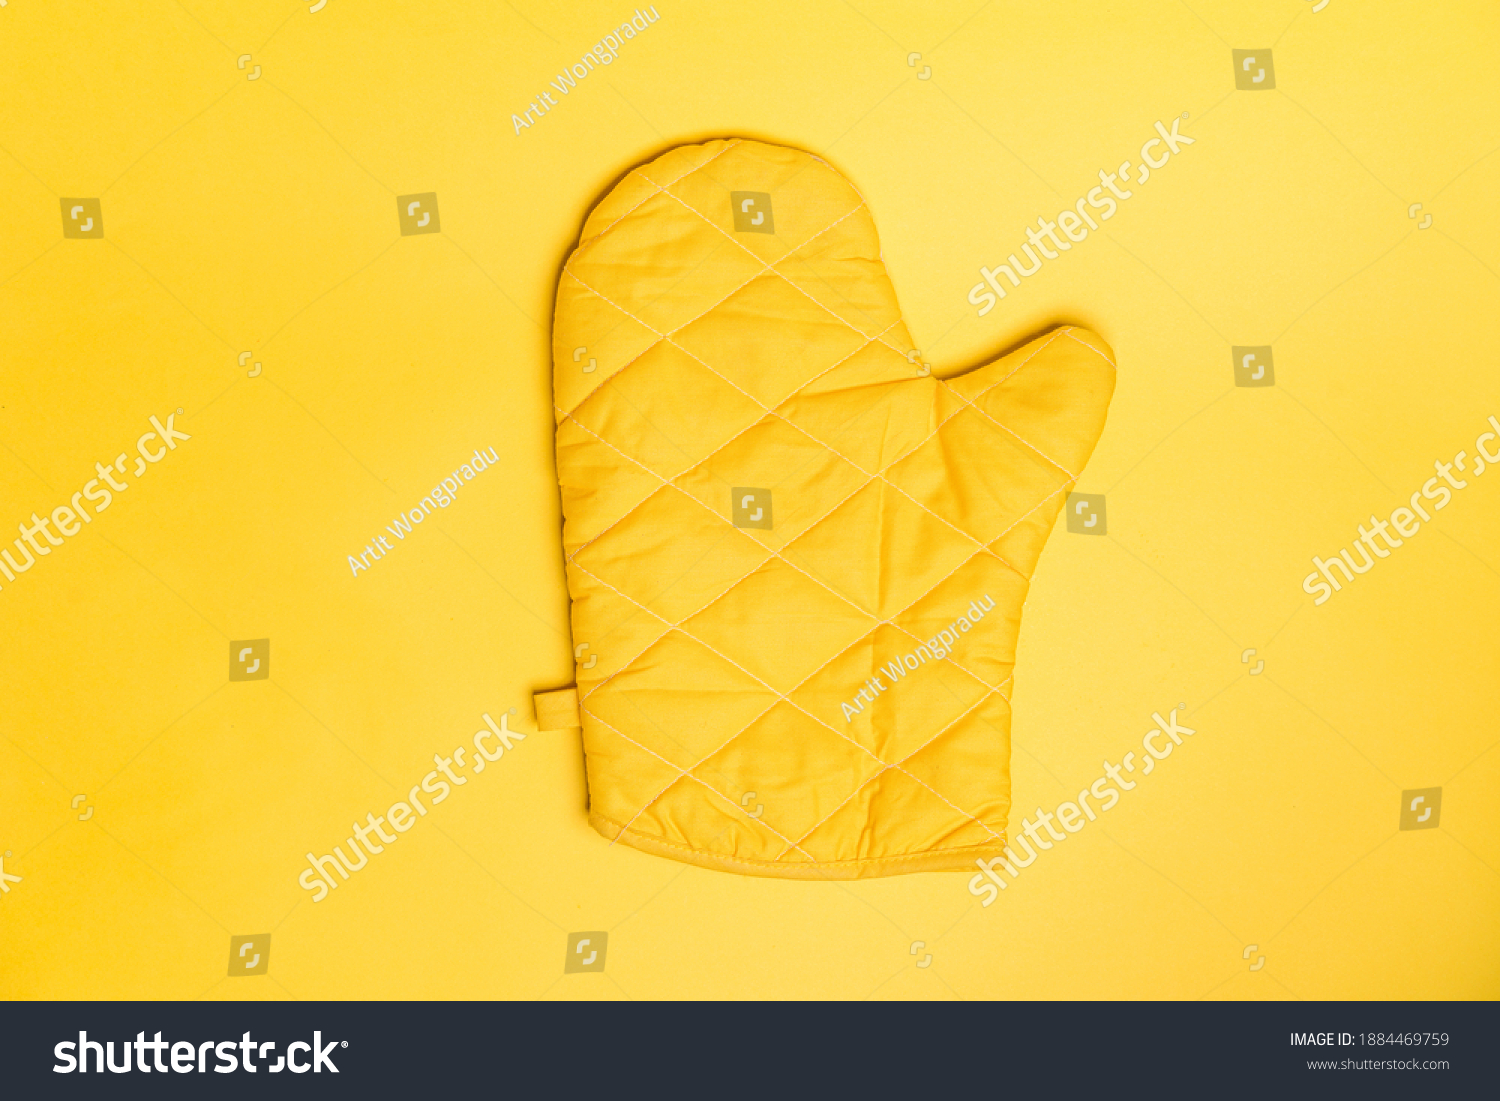 Top view of yellow oven gloves on yellow color background. Mockup for food banner and kitchen protection equipment. #1884469759